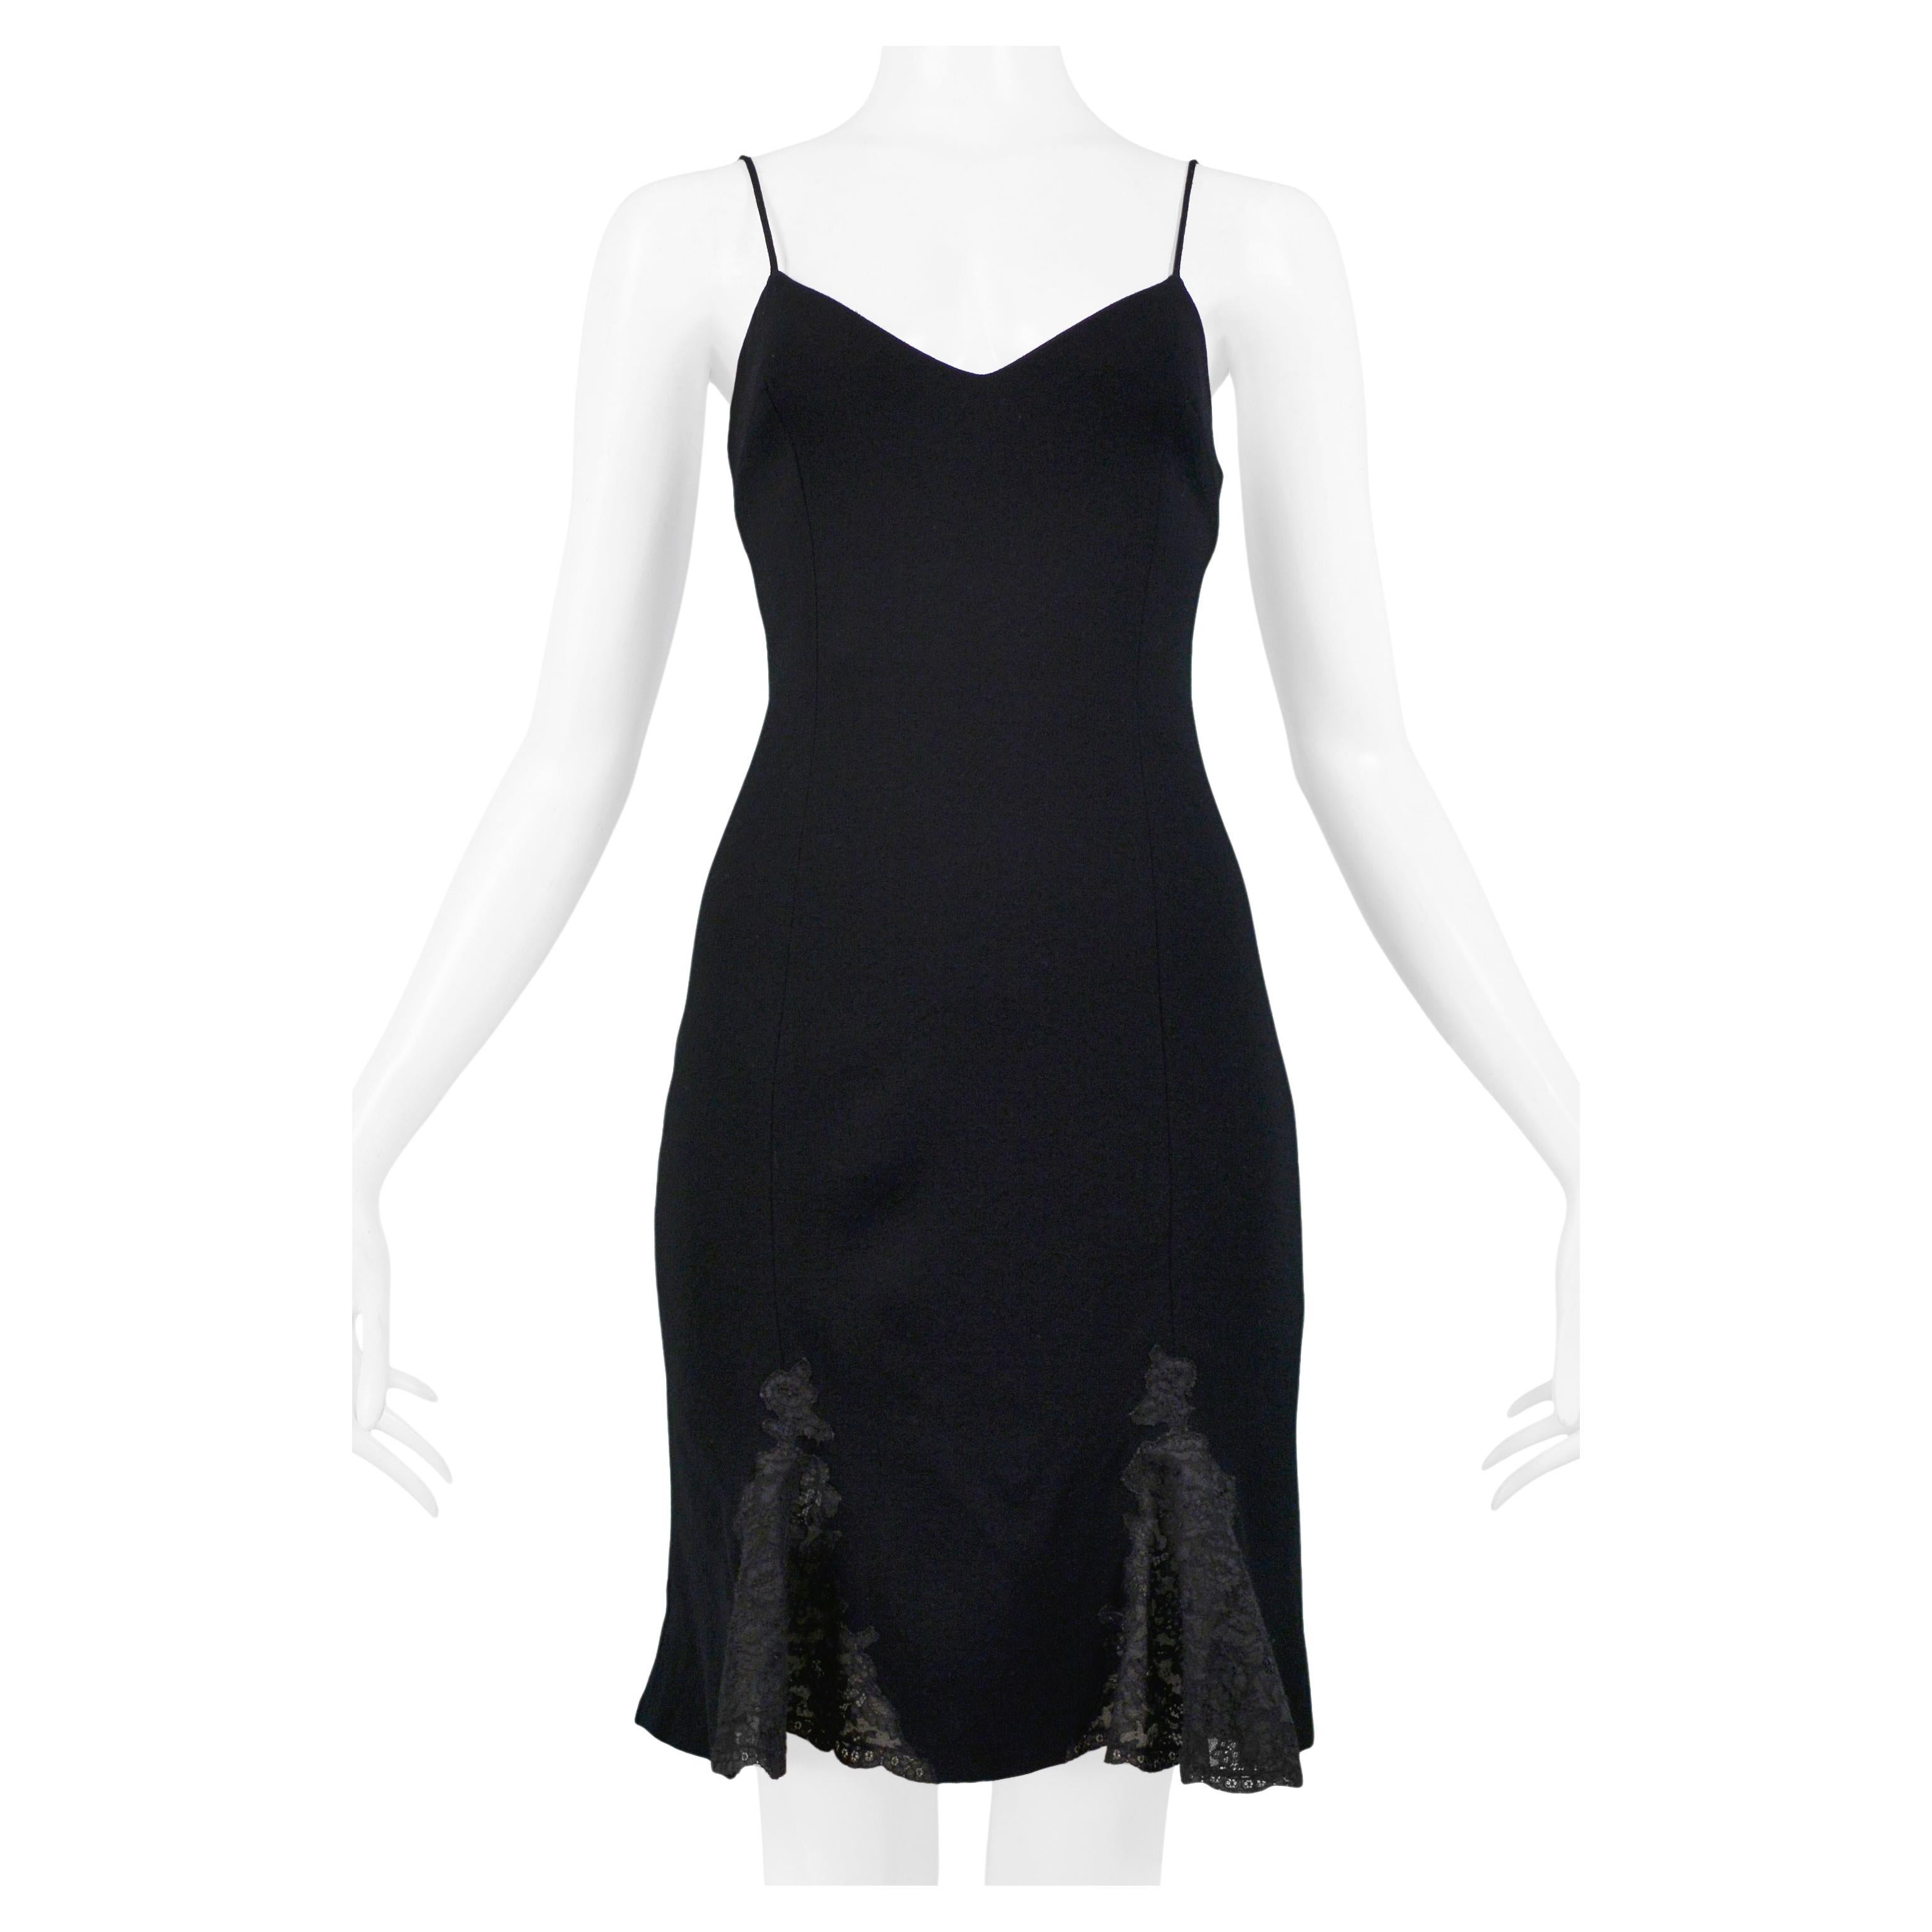 Christian Dior By John Galliano Black Slip Dress With Lace Panels For Sale